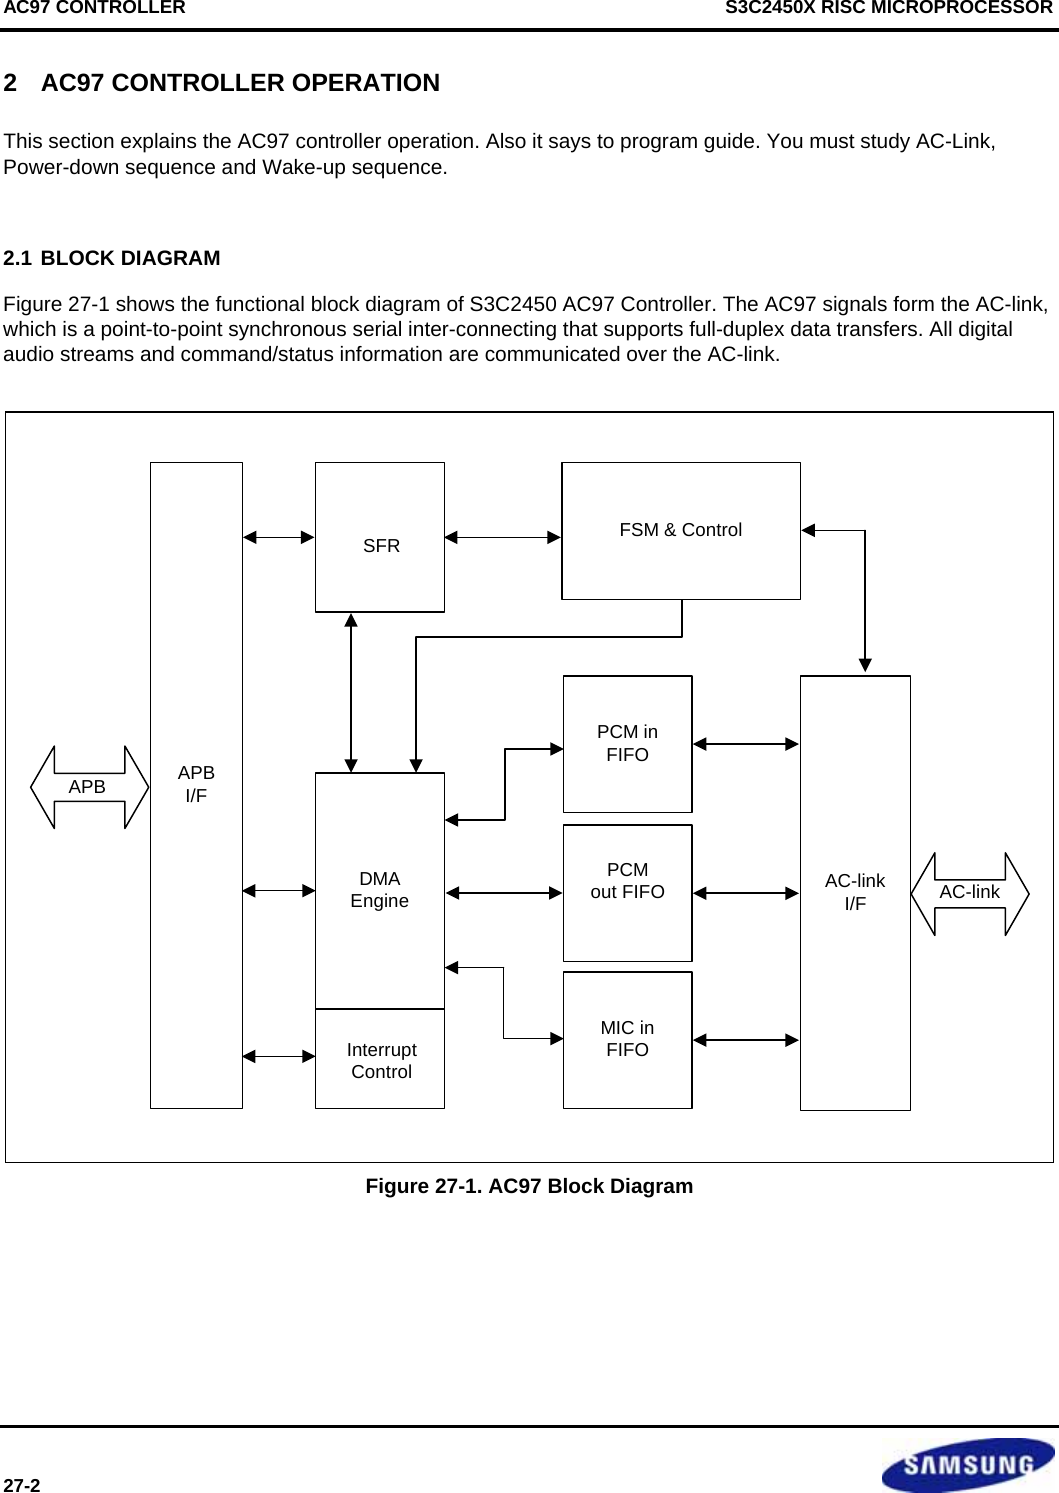 AC97 CONTROLLER  S3C2450X RISC MICROPROCESSOR 27-2  2  AC97 CONTROLLER OPERATION This section explains the AC97 controller operation. Also it says to program guide. You must study AC-Link, Power-down sequence and Wake-up sequence.  2.1 BLOCK DIAGRAM Figure 27-1 shows the functional block diagram of S3C2450 AC97 Controller. The AC97 signals form the AC-link, which is a point-to-point synchronous serial inter-connecting that supports full-duplex data transfers. All digital audio streams and command/status information are communicated over the AC-link.   APBI/FDMAEngineInterruptControlMIC inFIFOPCMout FIFOPCM inFIFOSFRAC-linkI/FFSM &amp; ControlAPBAC-link Figure 27-1. AC97 Block Diagram  